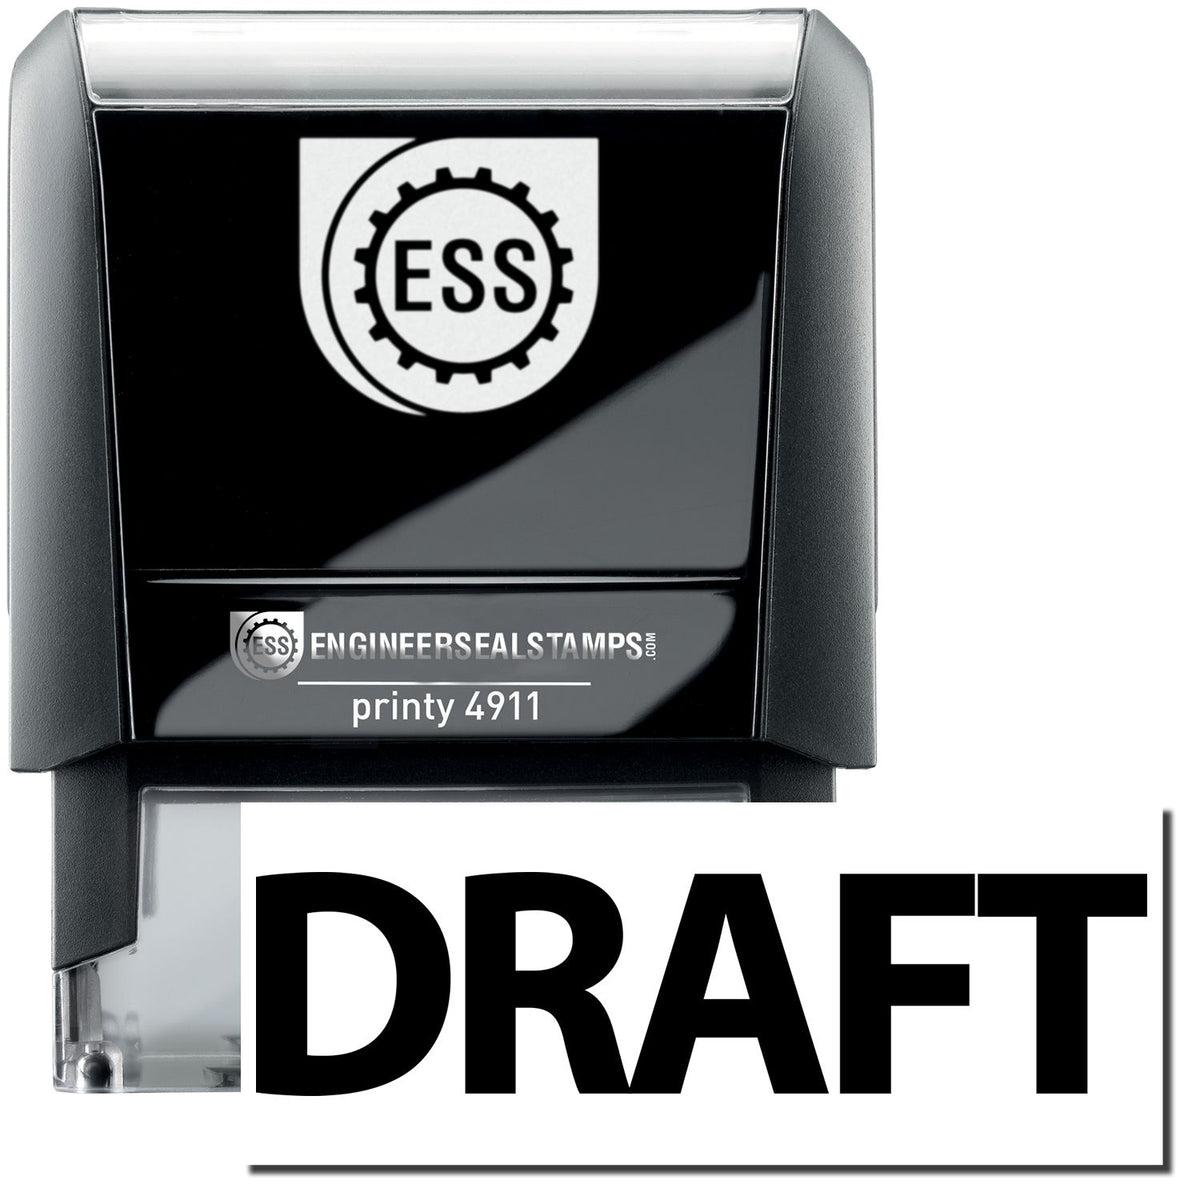 A self-inking stamp with a stamped image showing how the text &quot;DRAFT&quot; in bold font is displayed after stamping.